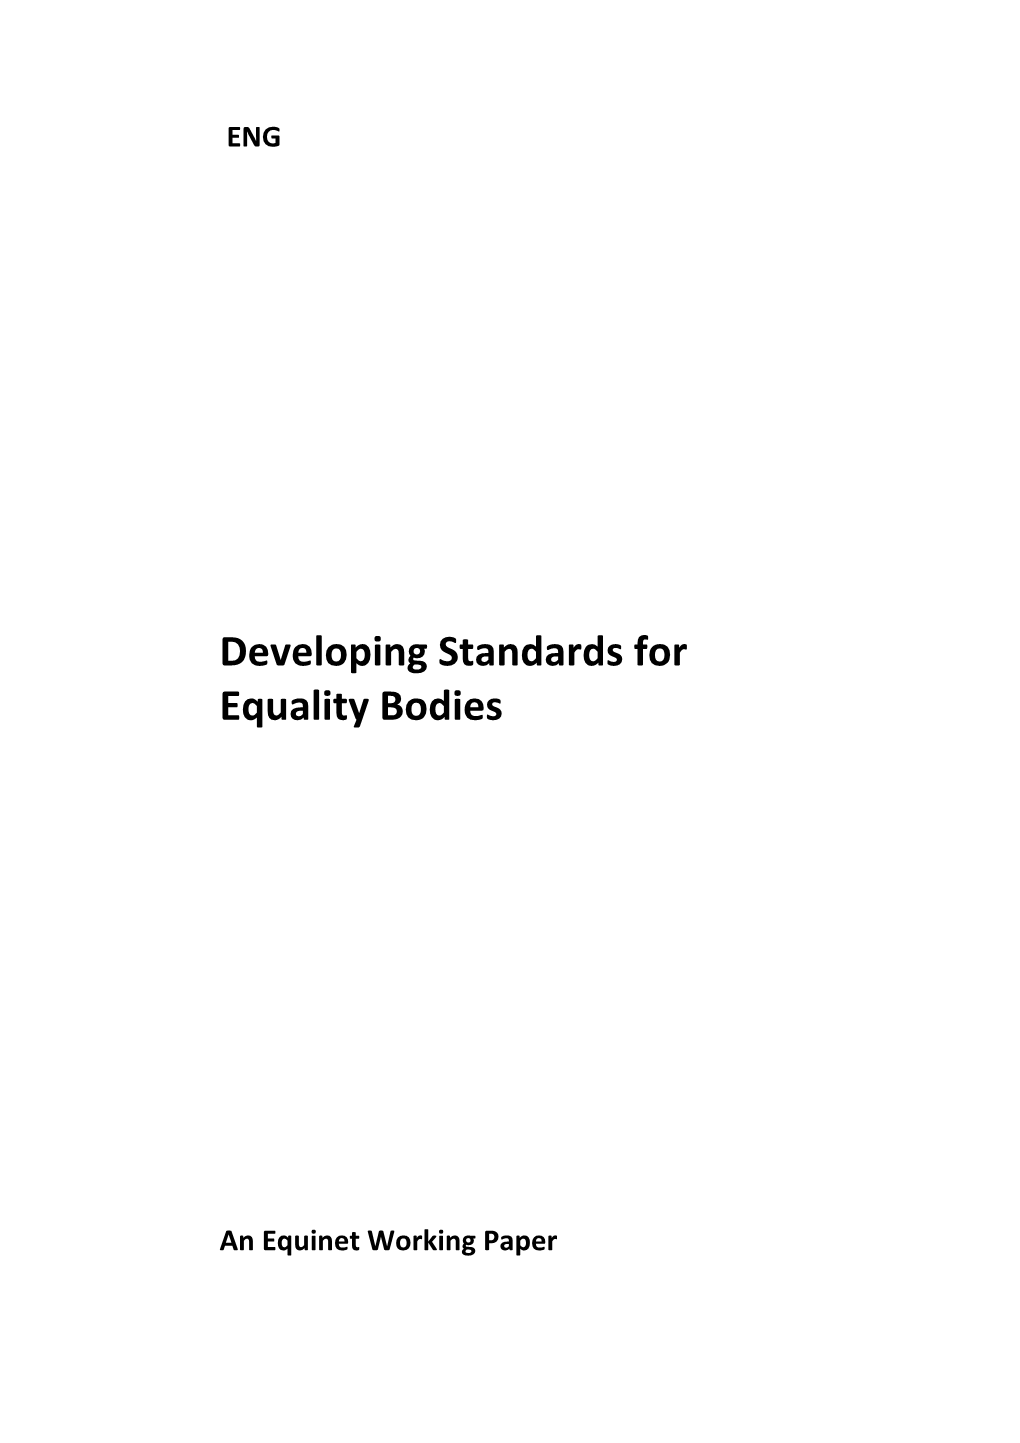 Developing Standards for Equality Bodies